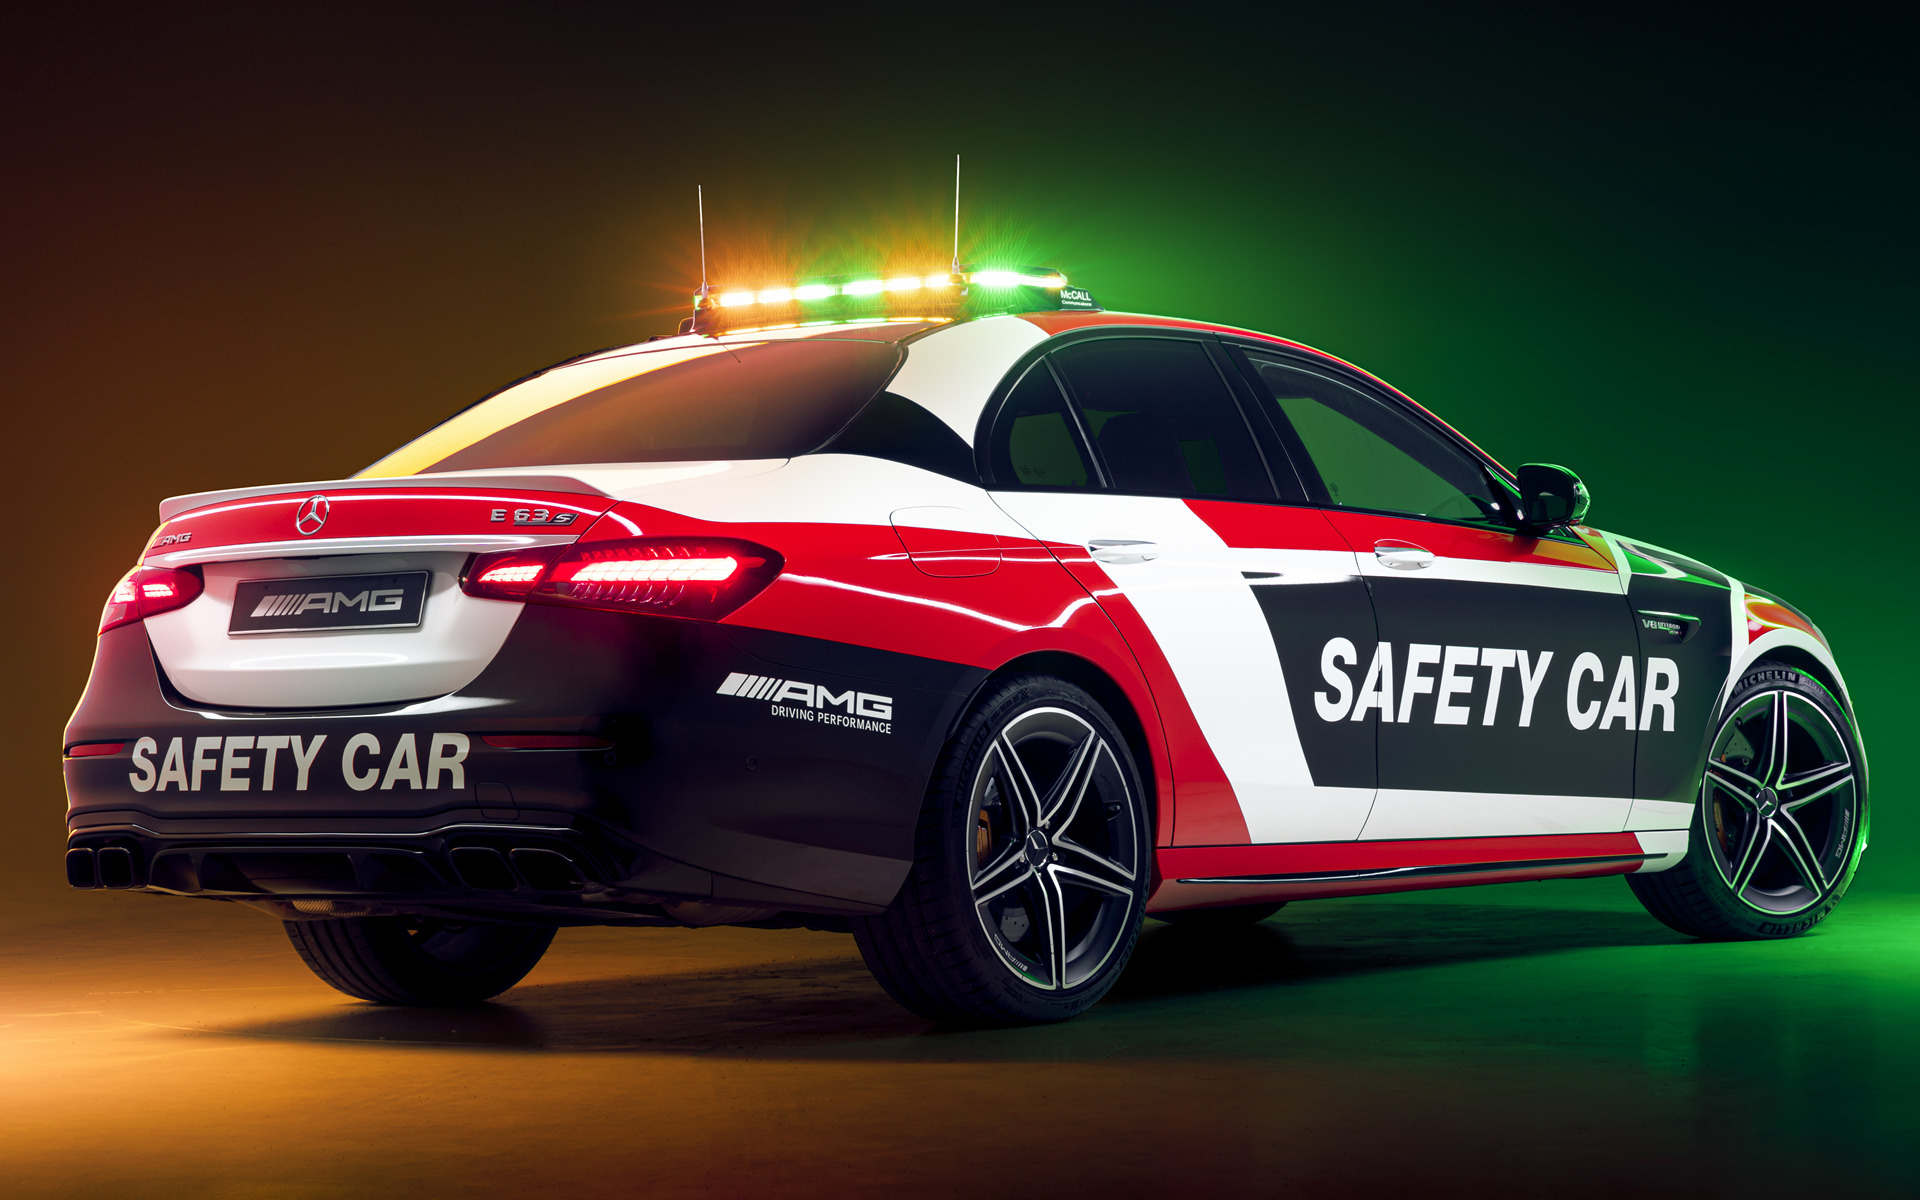 Mercedes-Amg E 63 S Safety Car Wallpapers